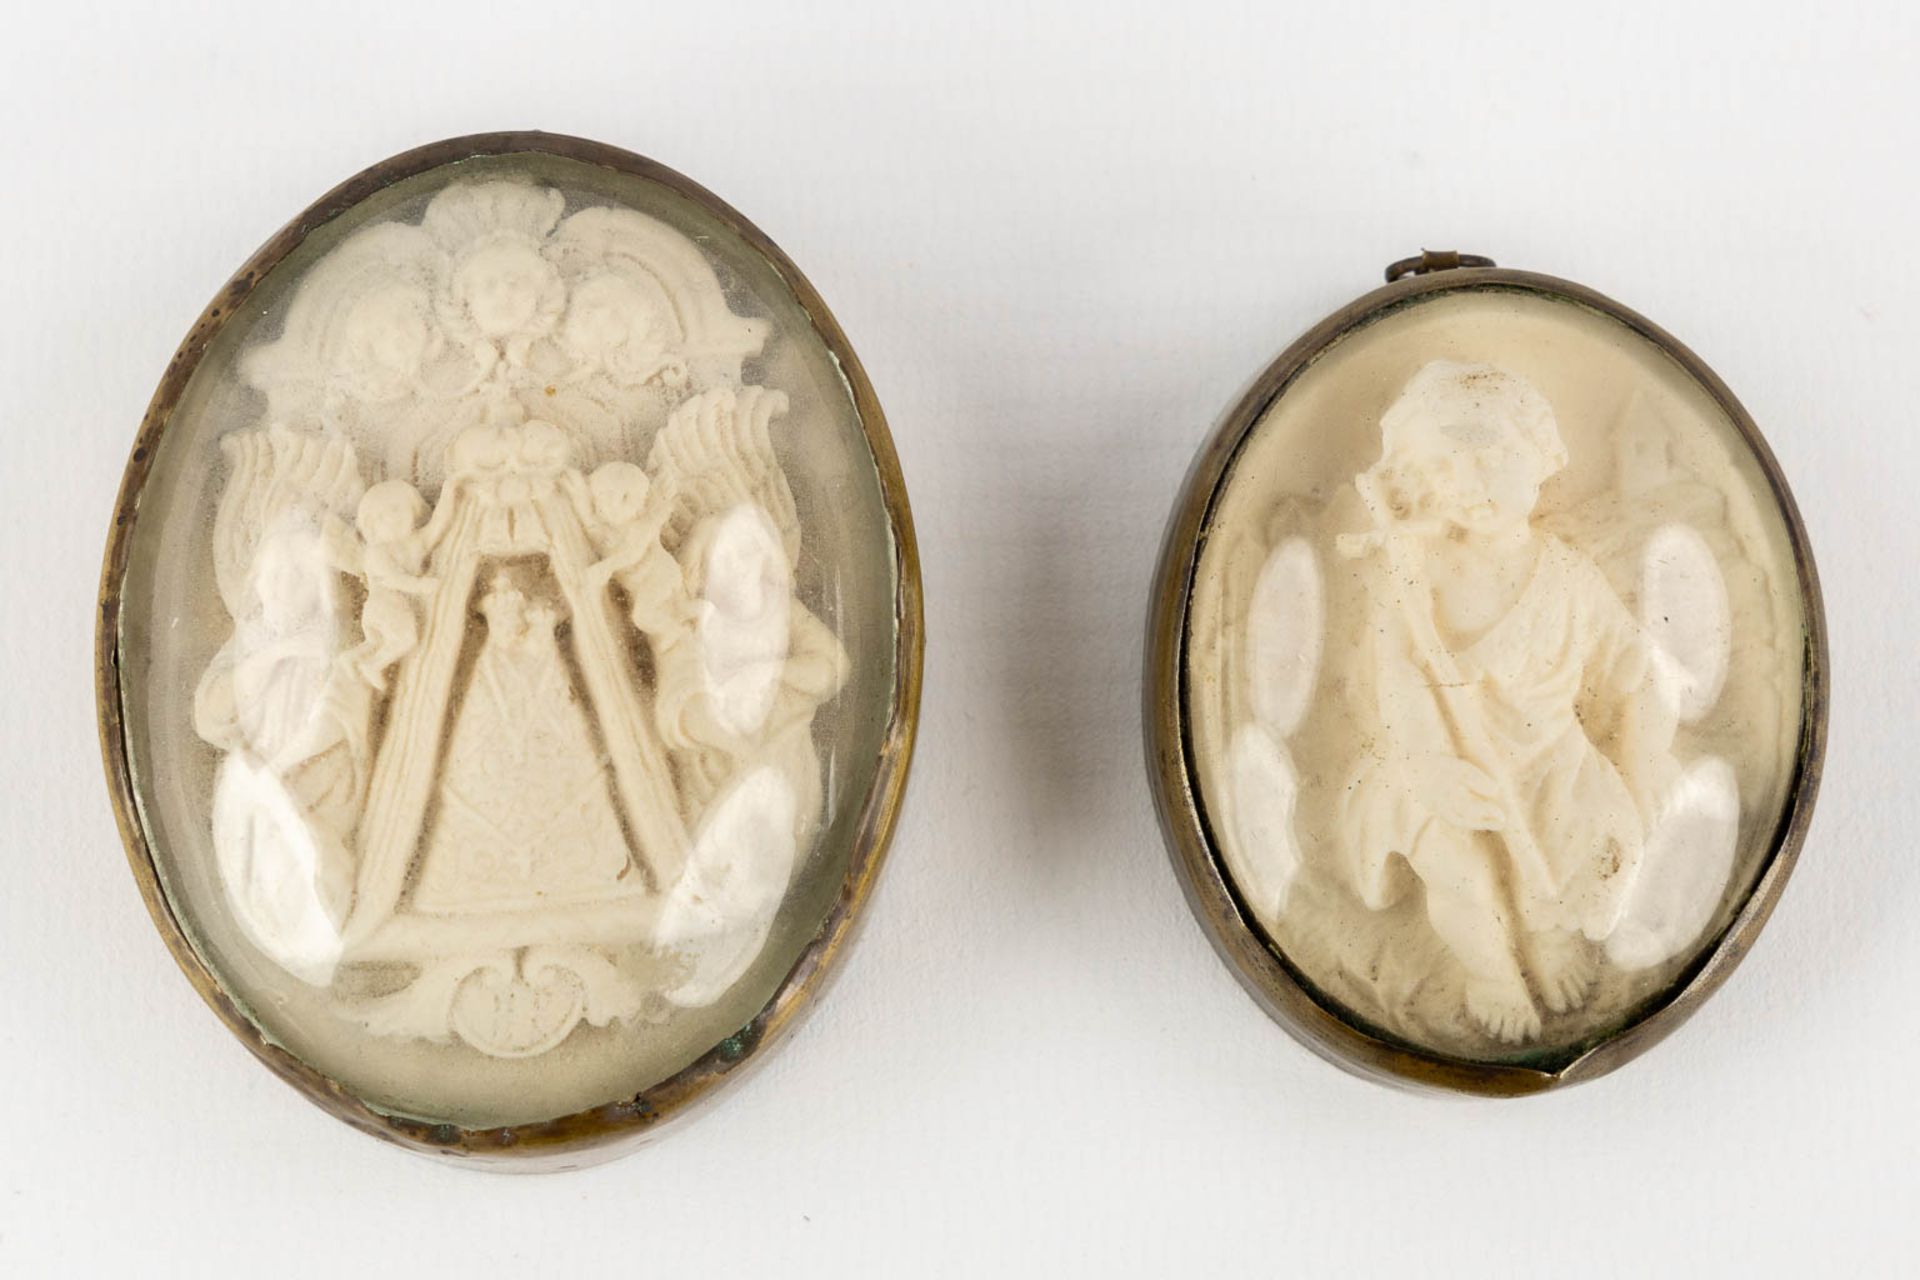 An assembled collection of reliquary items. 19th and 20th C. (W:8 x H:15,5 cm) - Image 11 of 12